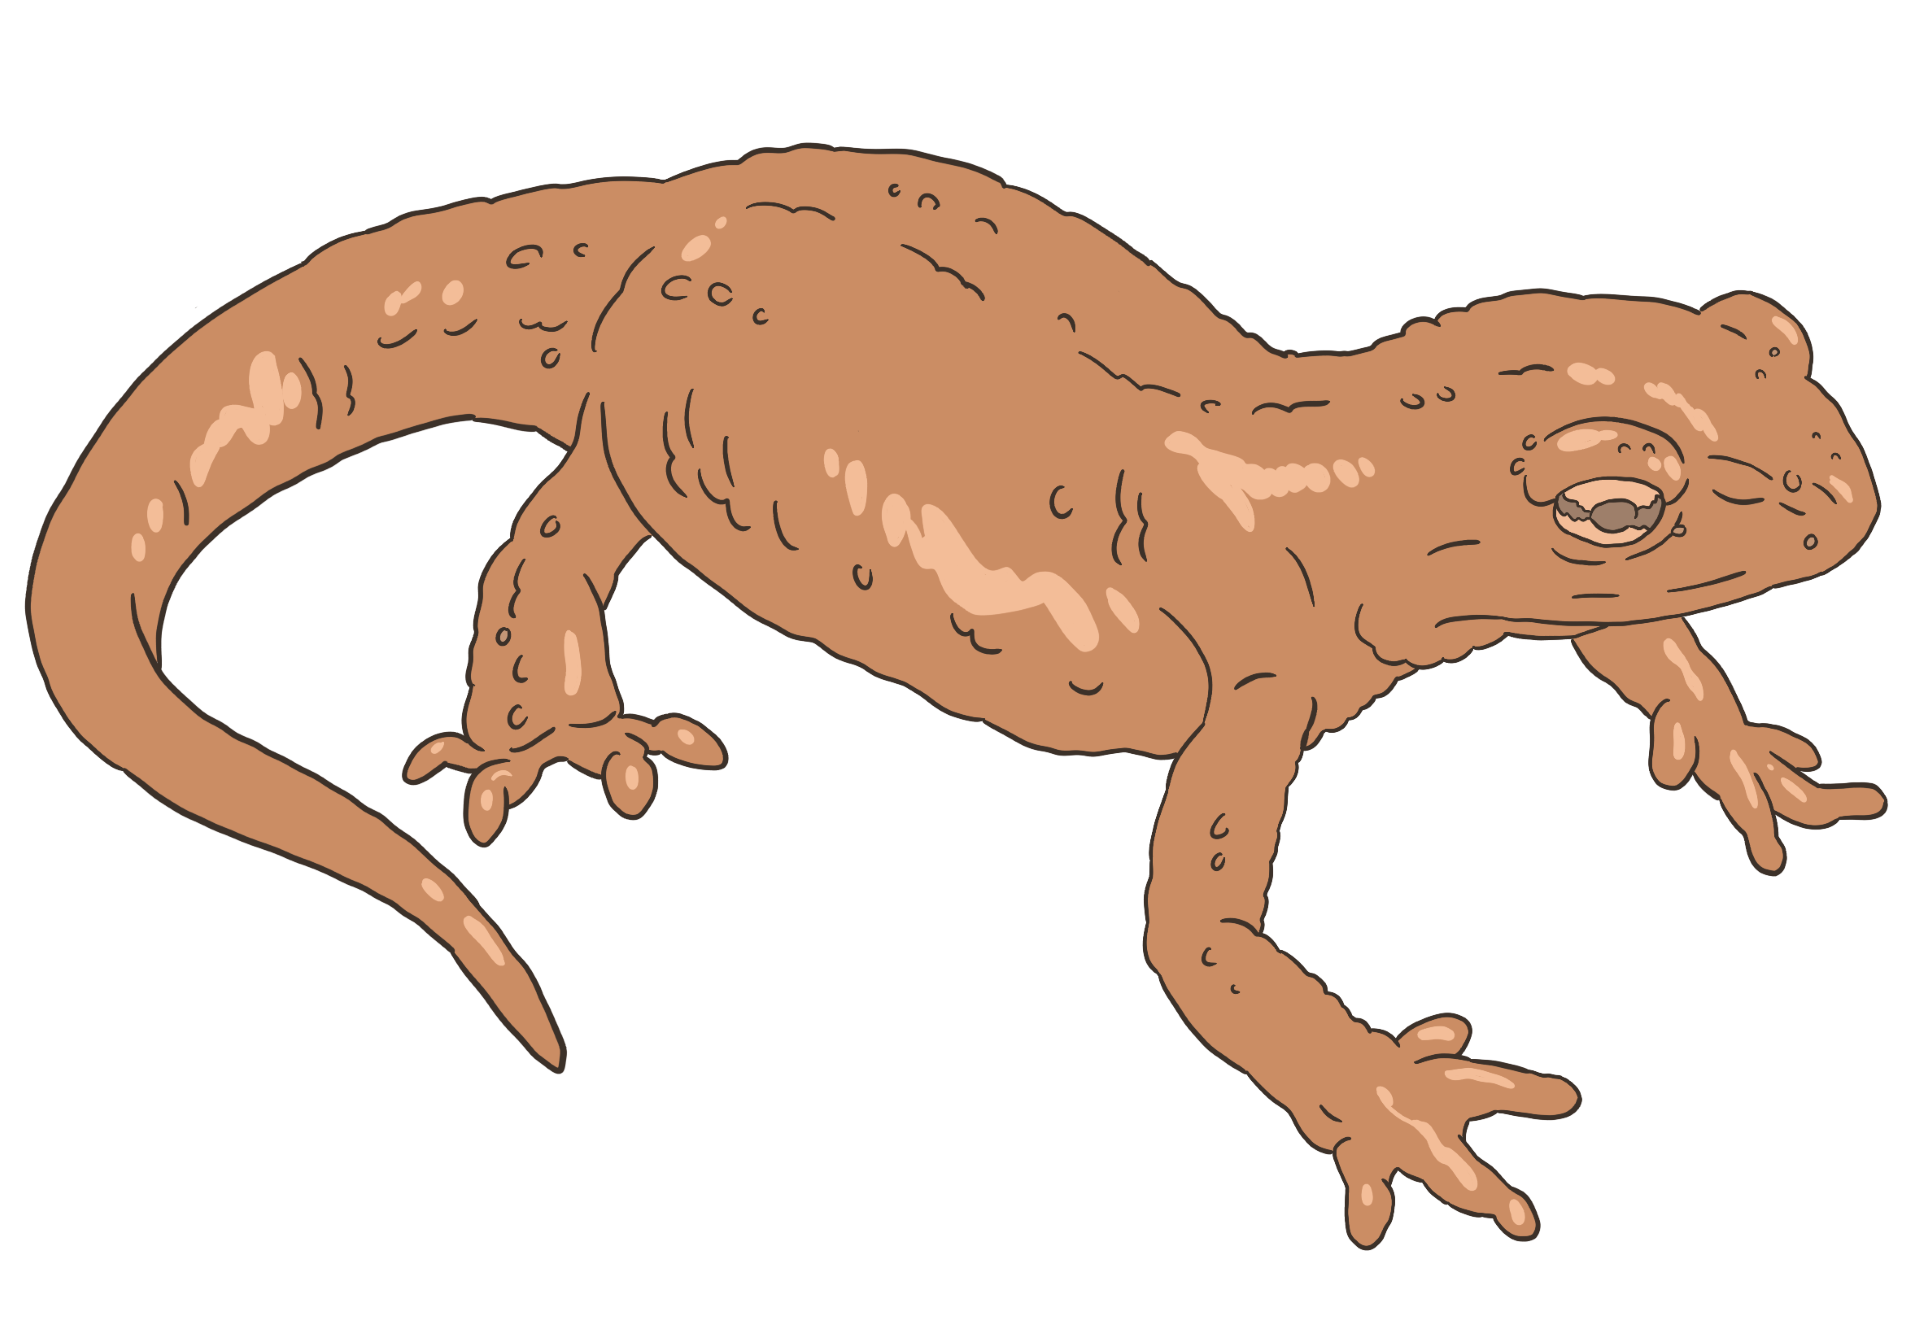 A drawing of a kind of newt from the Late Jurassic preriod called Iridotriton hechti.